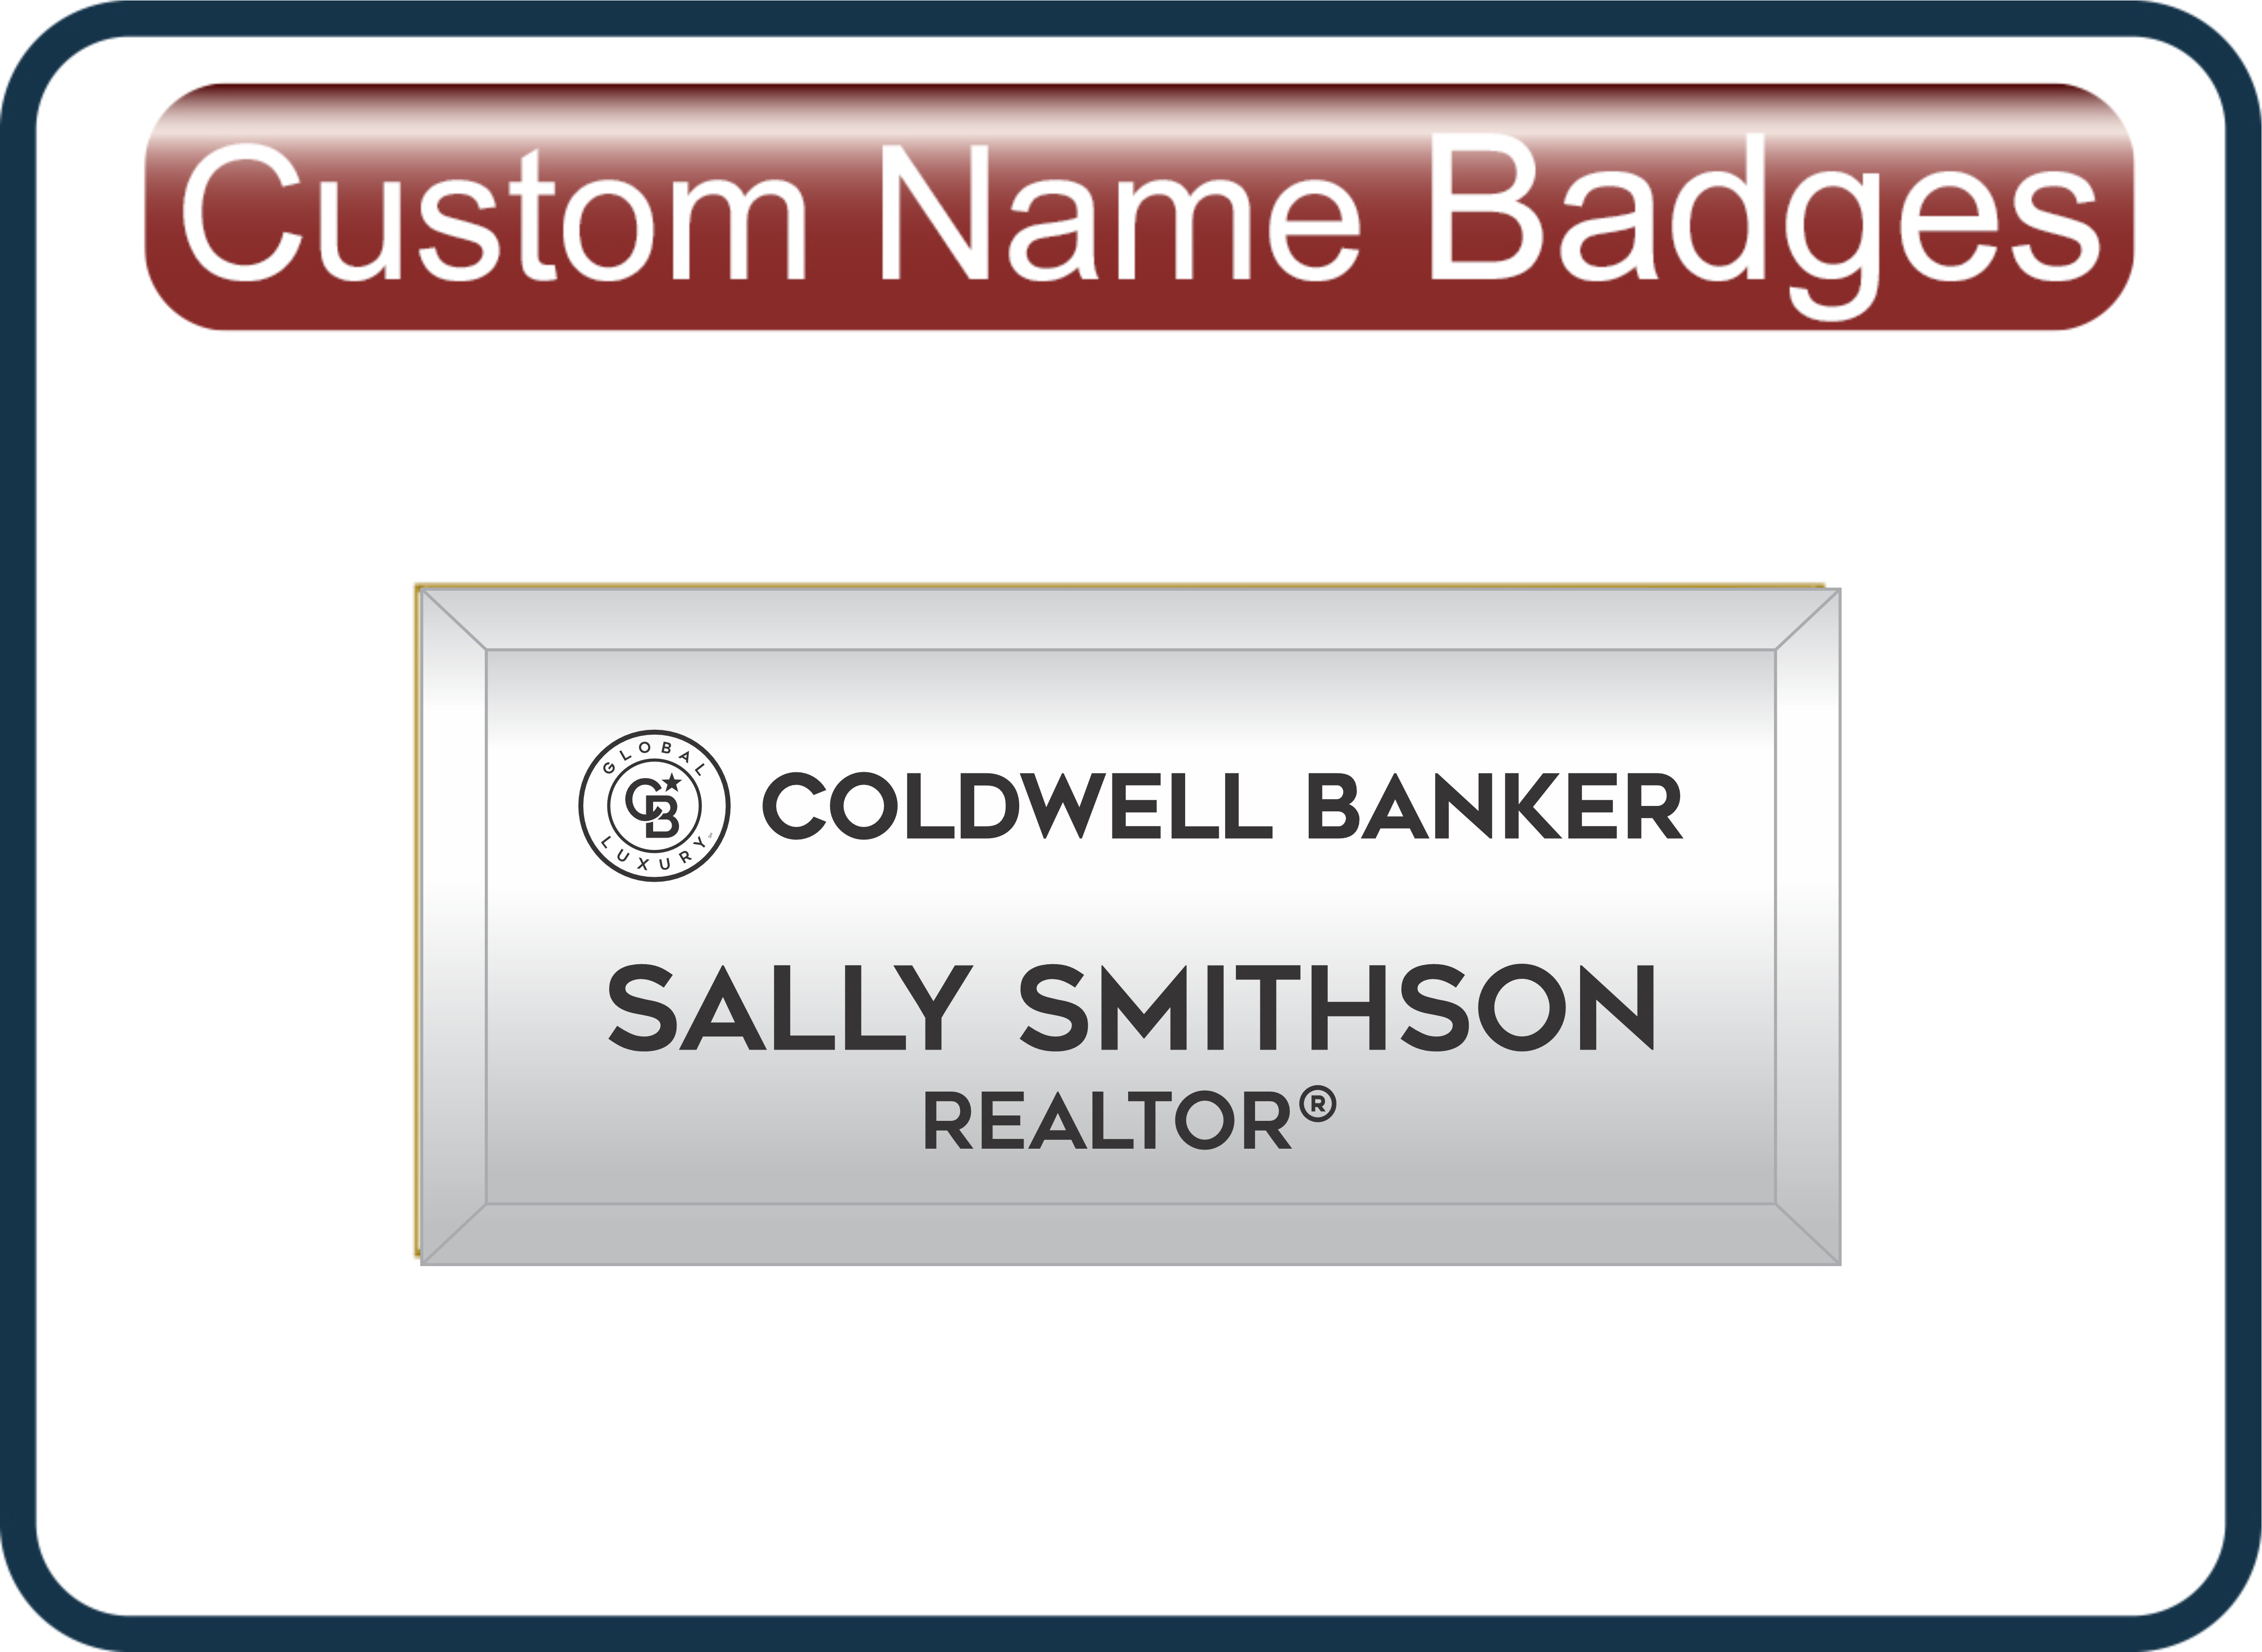 Coldwell Banker® Global Luxury Name Badges